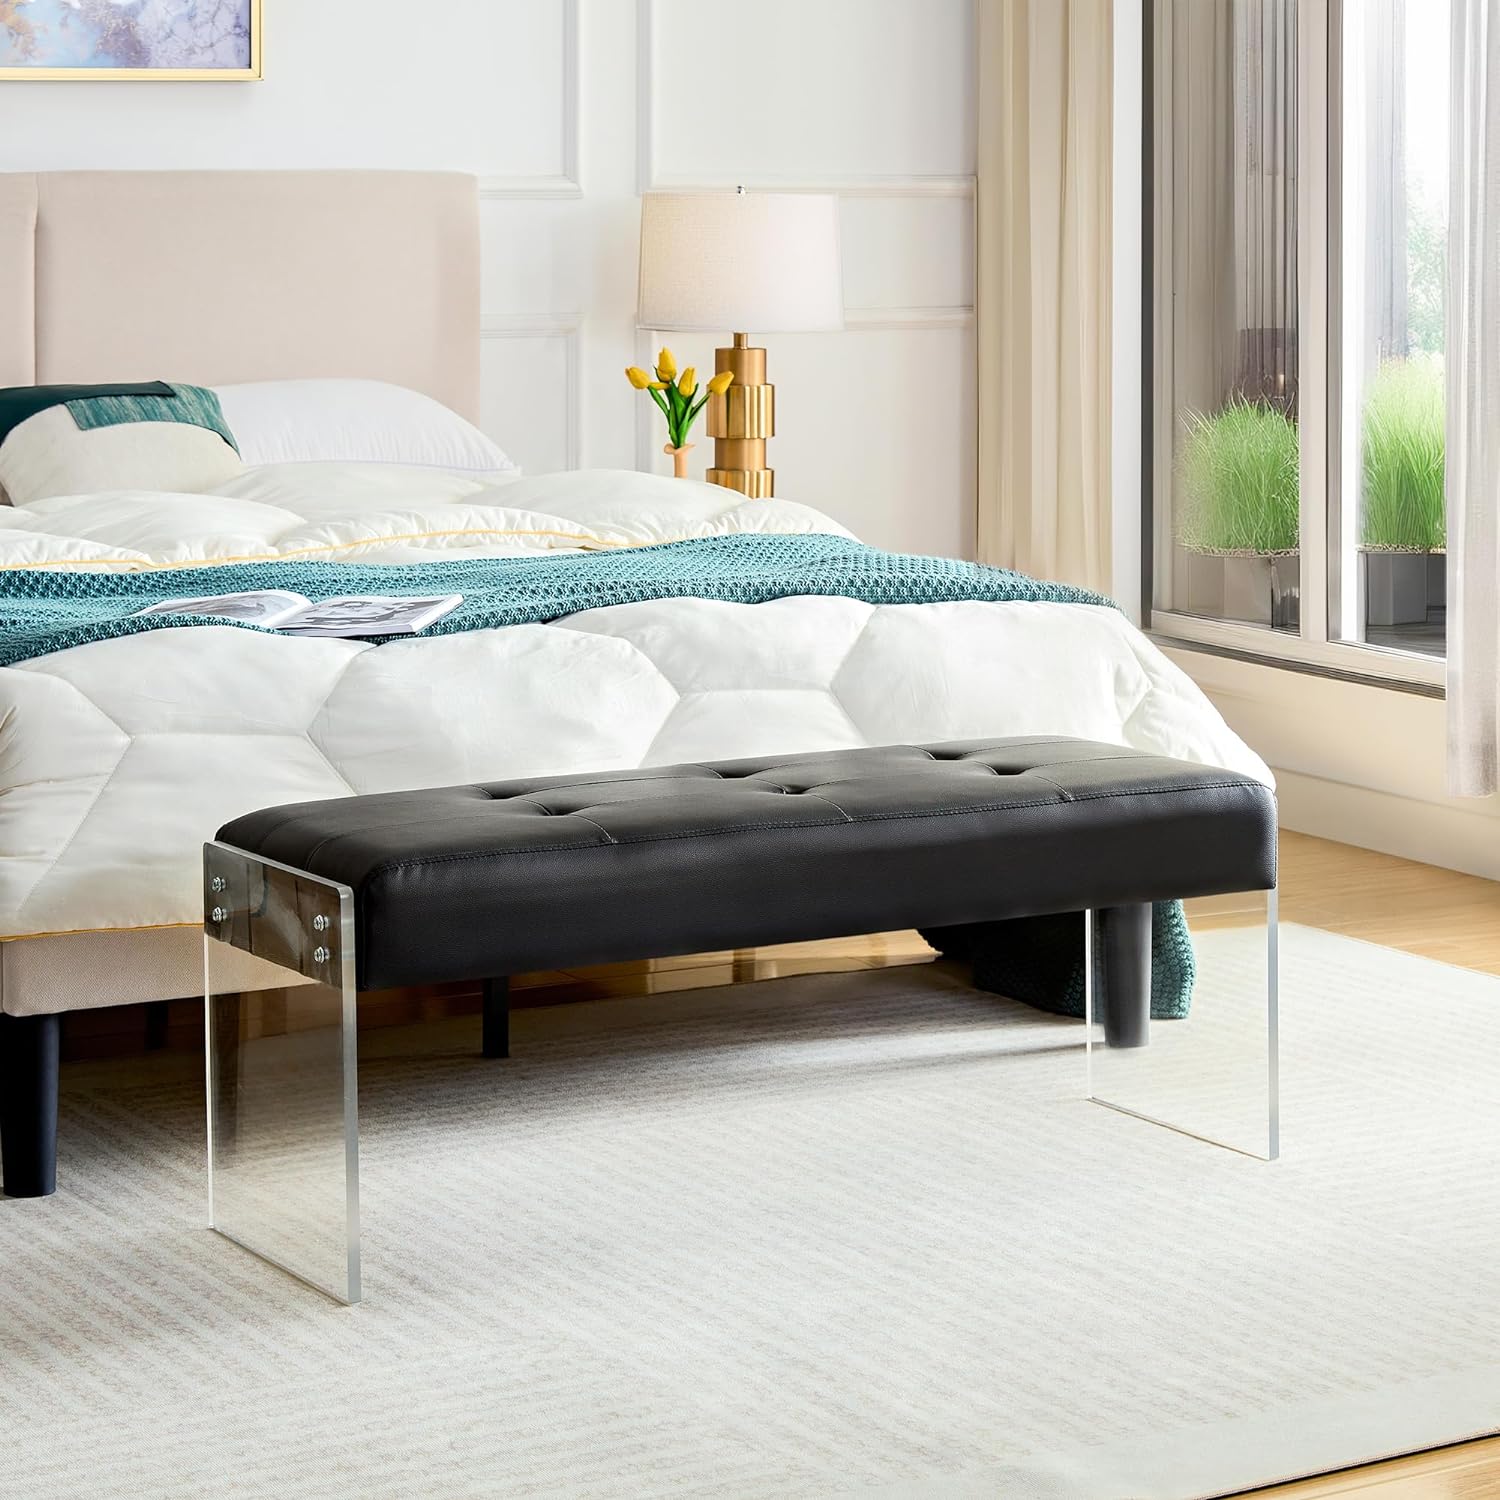 VECELO 44.7” Modern End of Bed, PU Leather Upholstered Entryway Transparent Legs